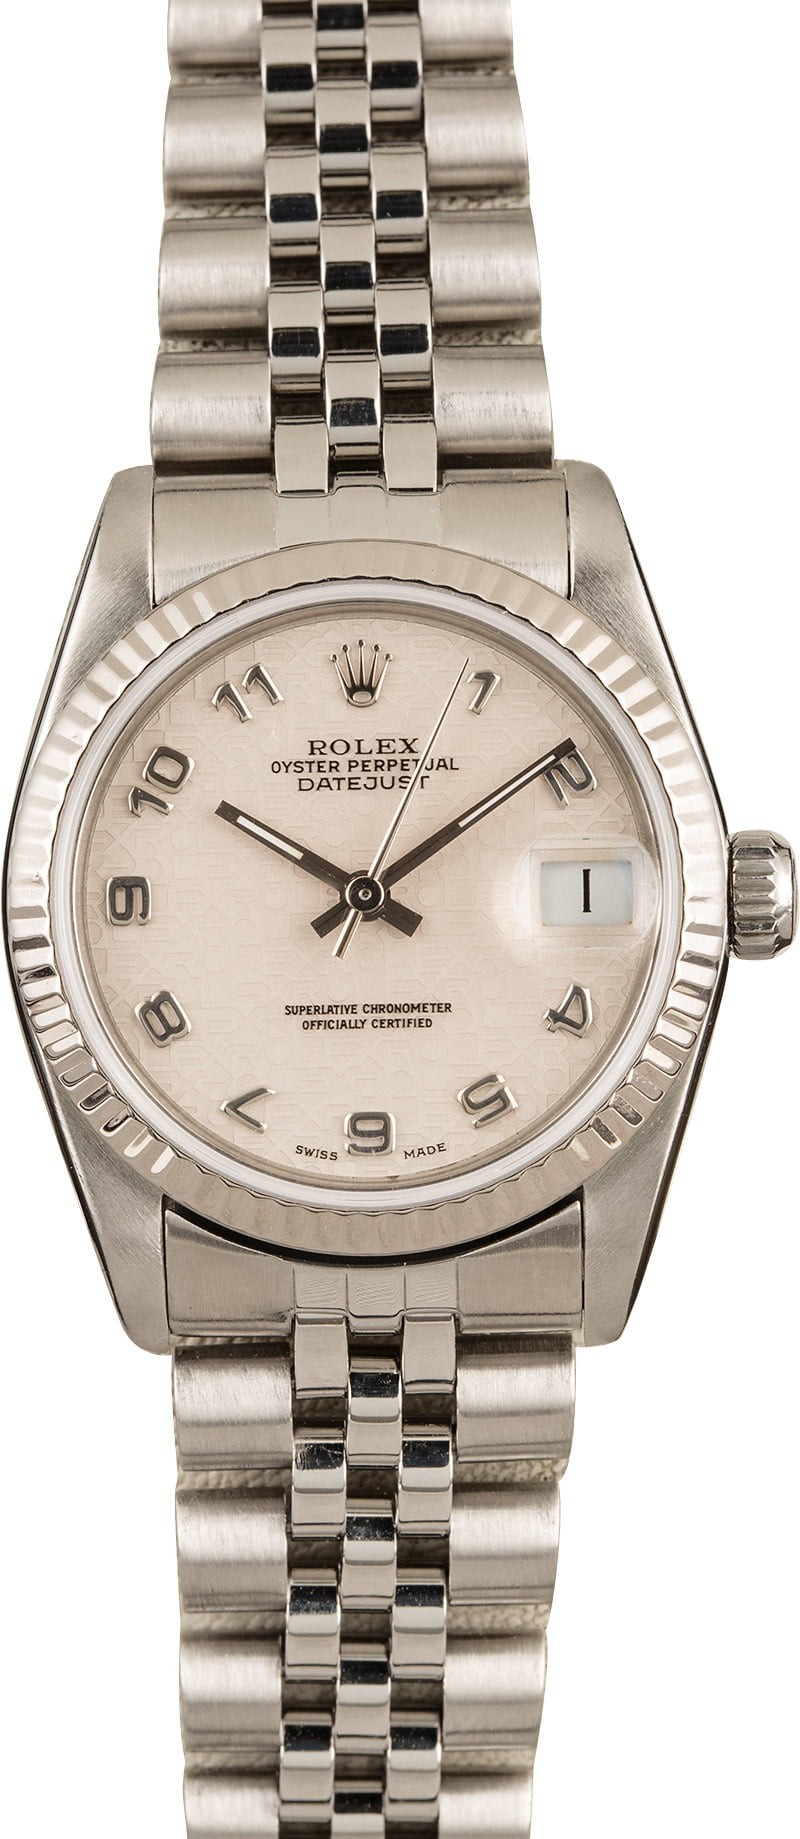 Rolex Datejust White Jubilee Dial 68274 WE04133